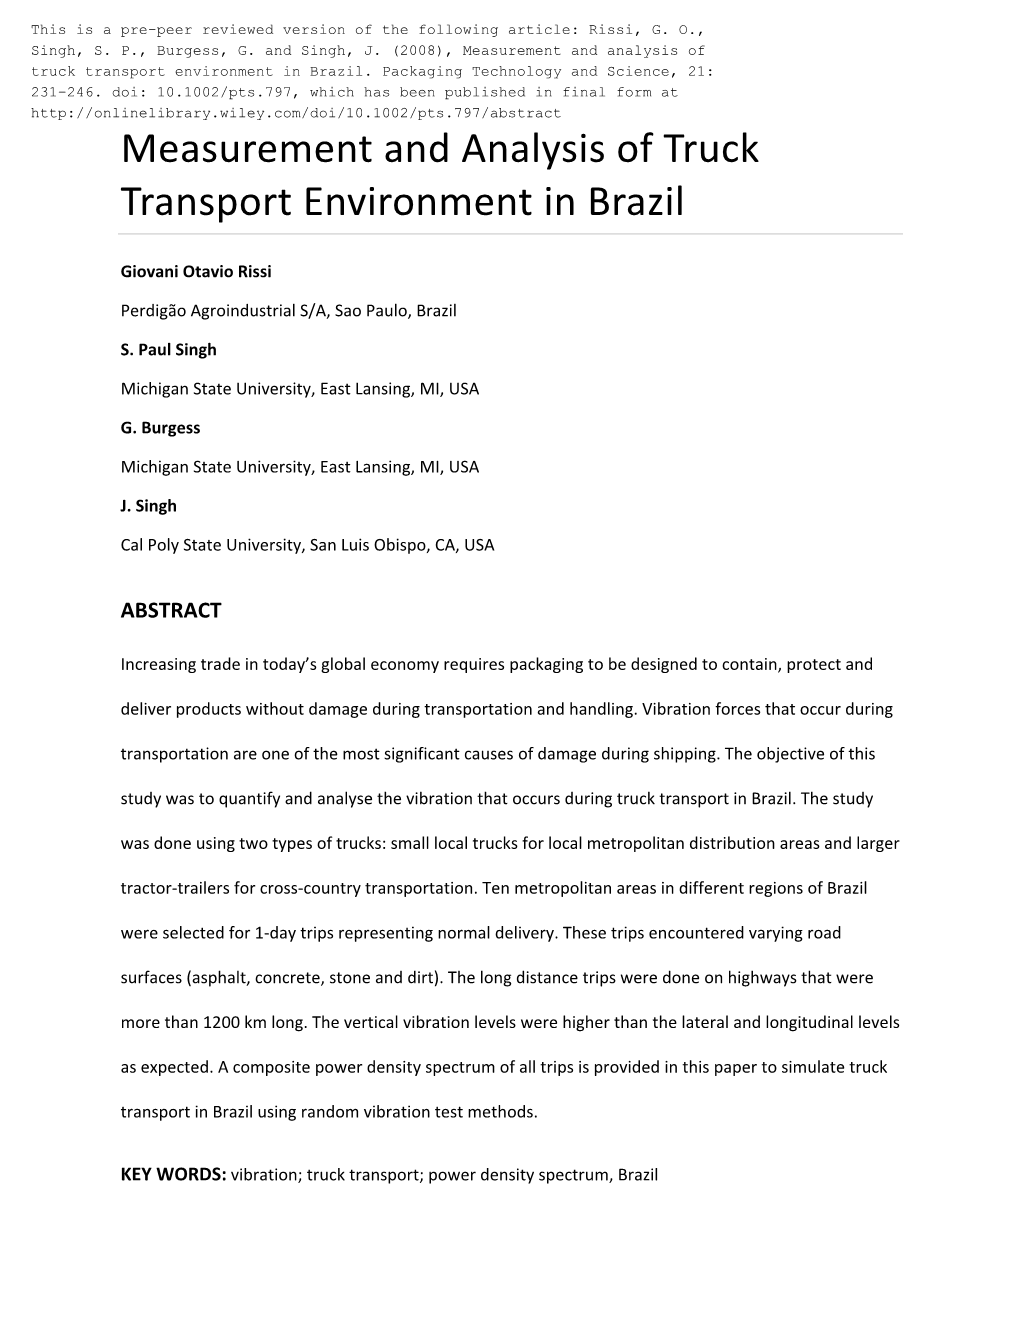 Measurement and Analysis of Truck Transport Environment in Brazil